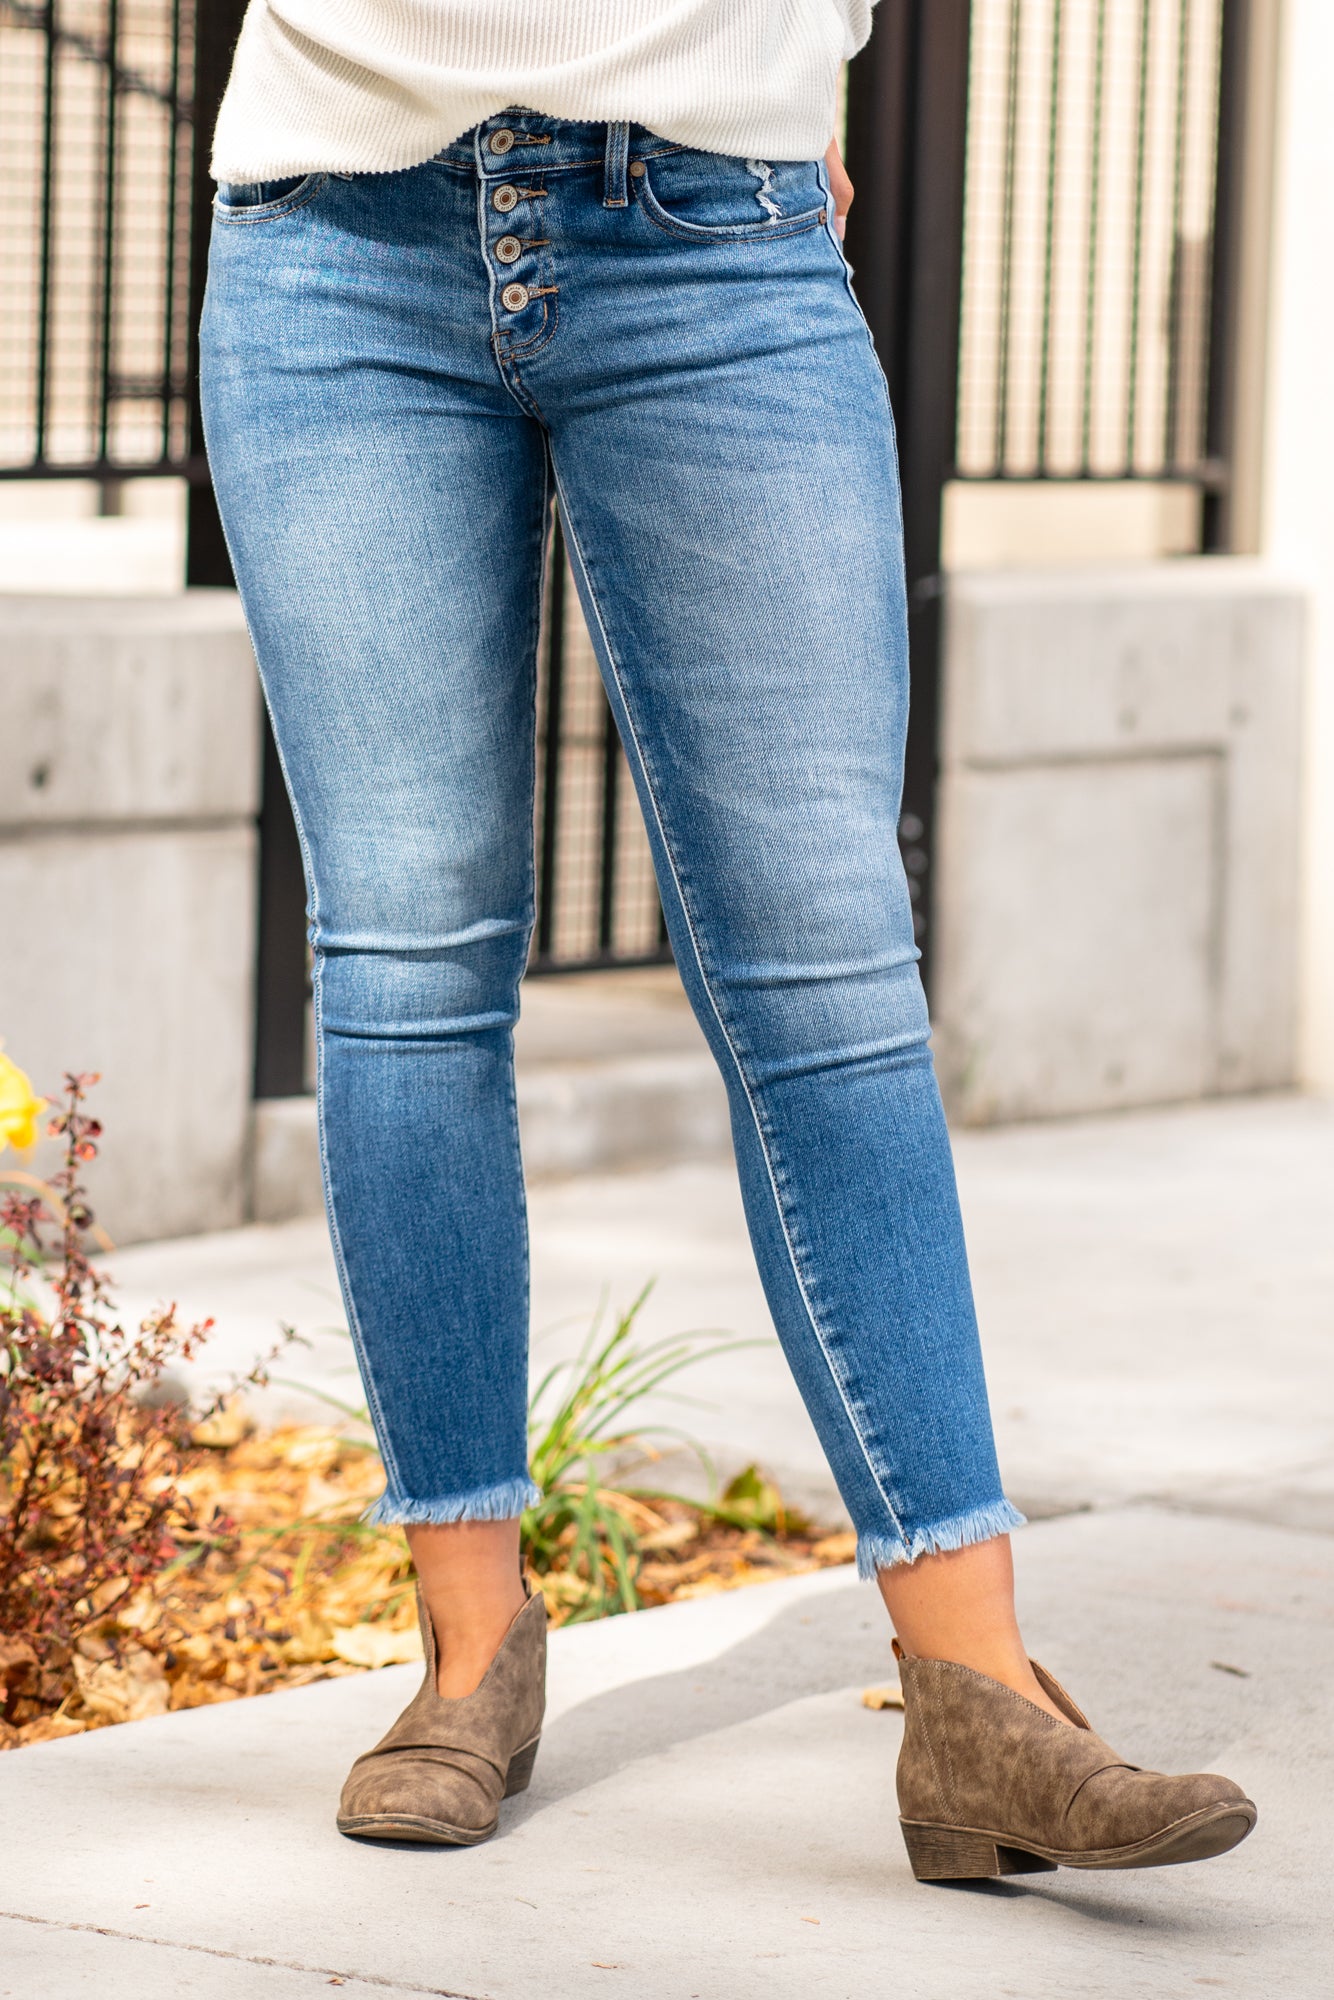 Le Fashion: 2 Takes On Fall's Cropped Raw-Hem Denim and Tall Boot Trend